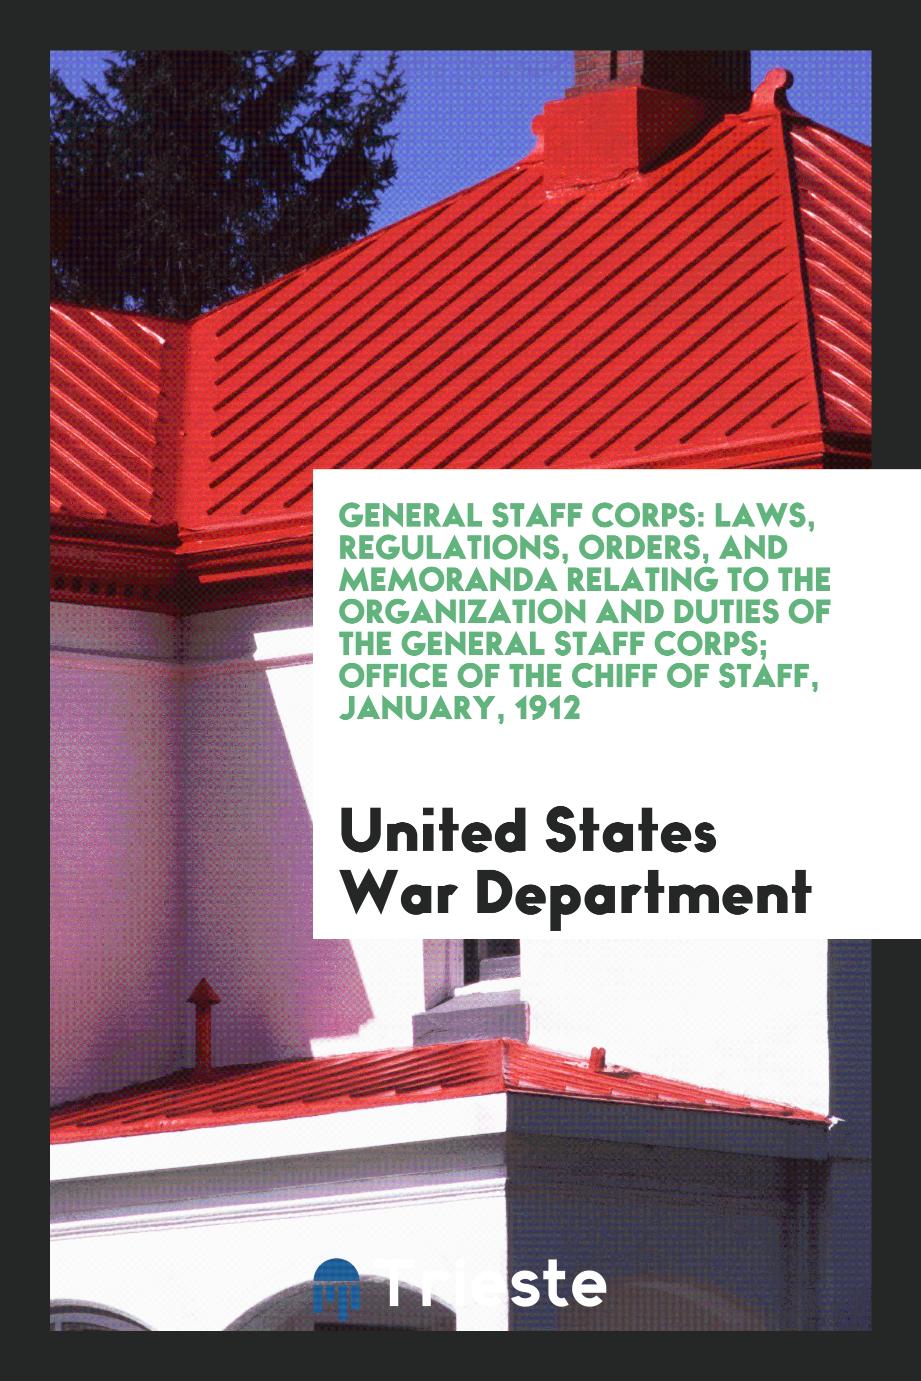 General staff corps: Laws, regulations, orders, and memoranda relating to the organization and duties of the general staff corps; office of the chiff of staff, january, 1912